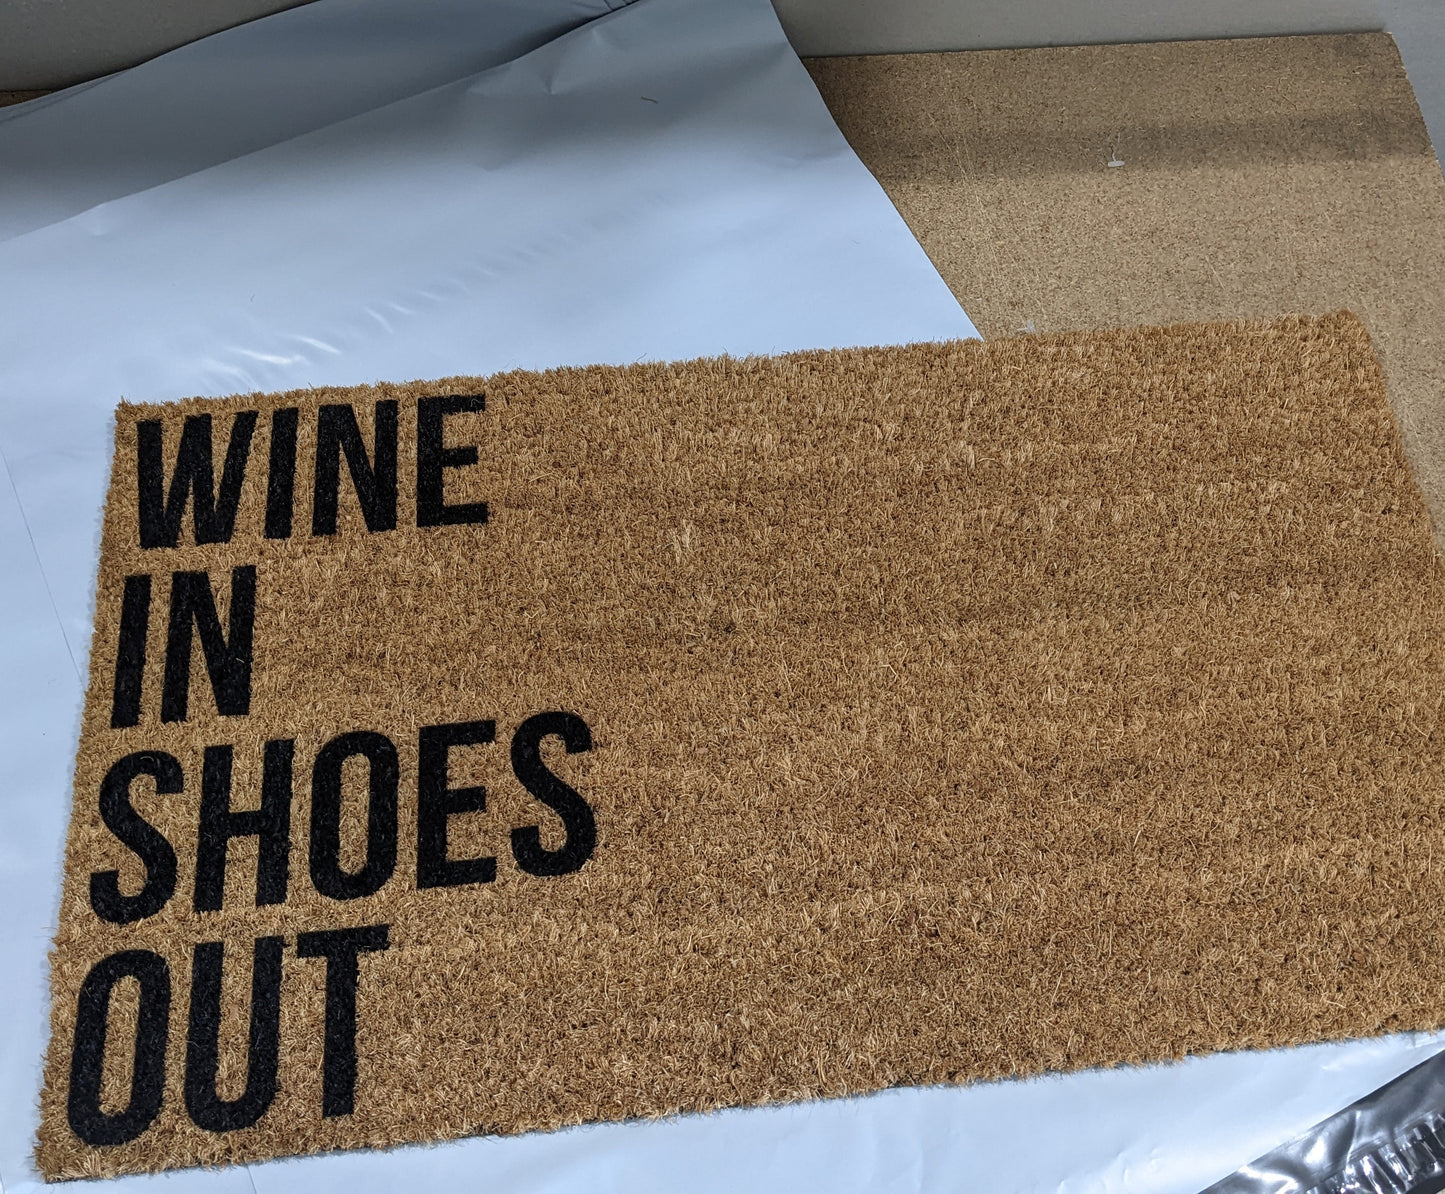 Your own text doormat | Personalised